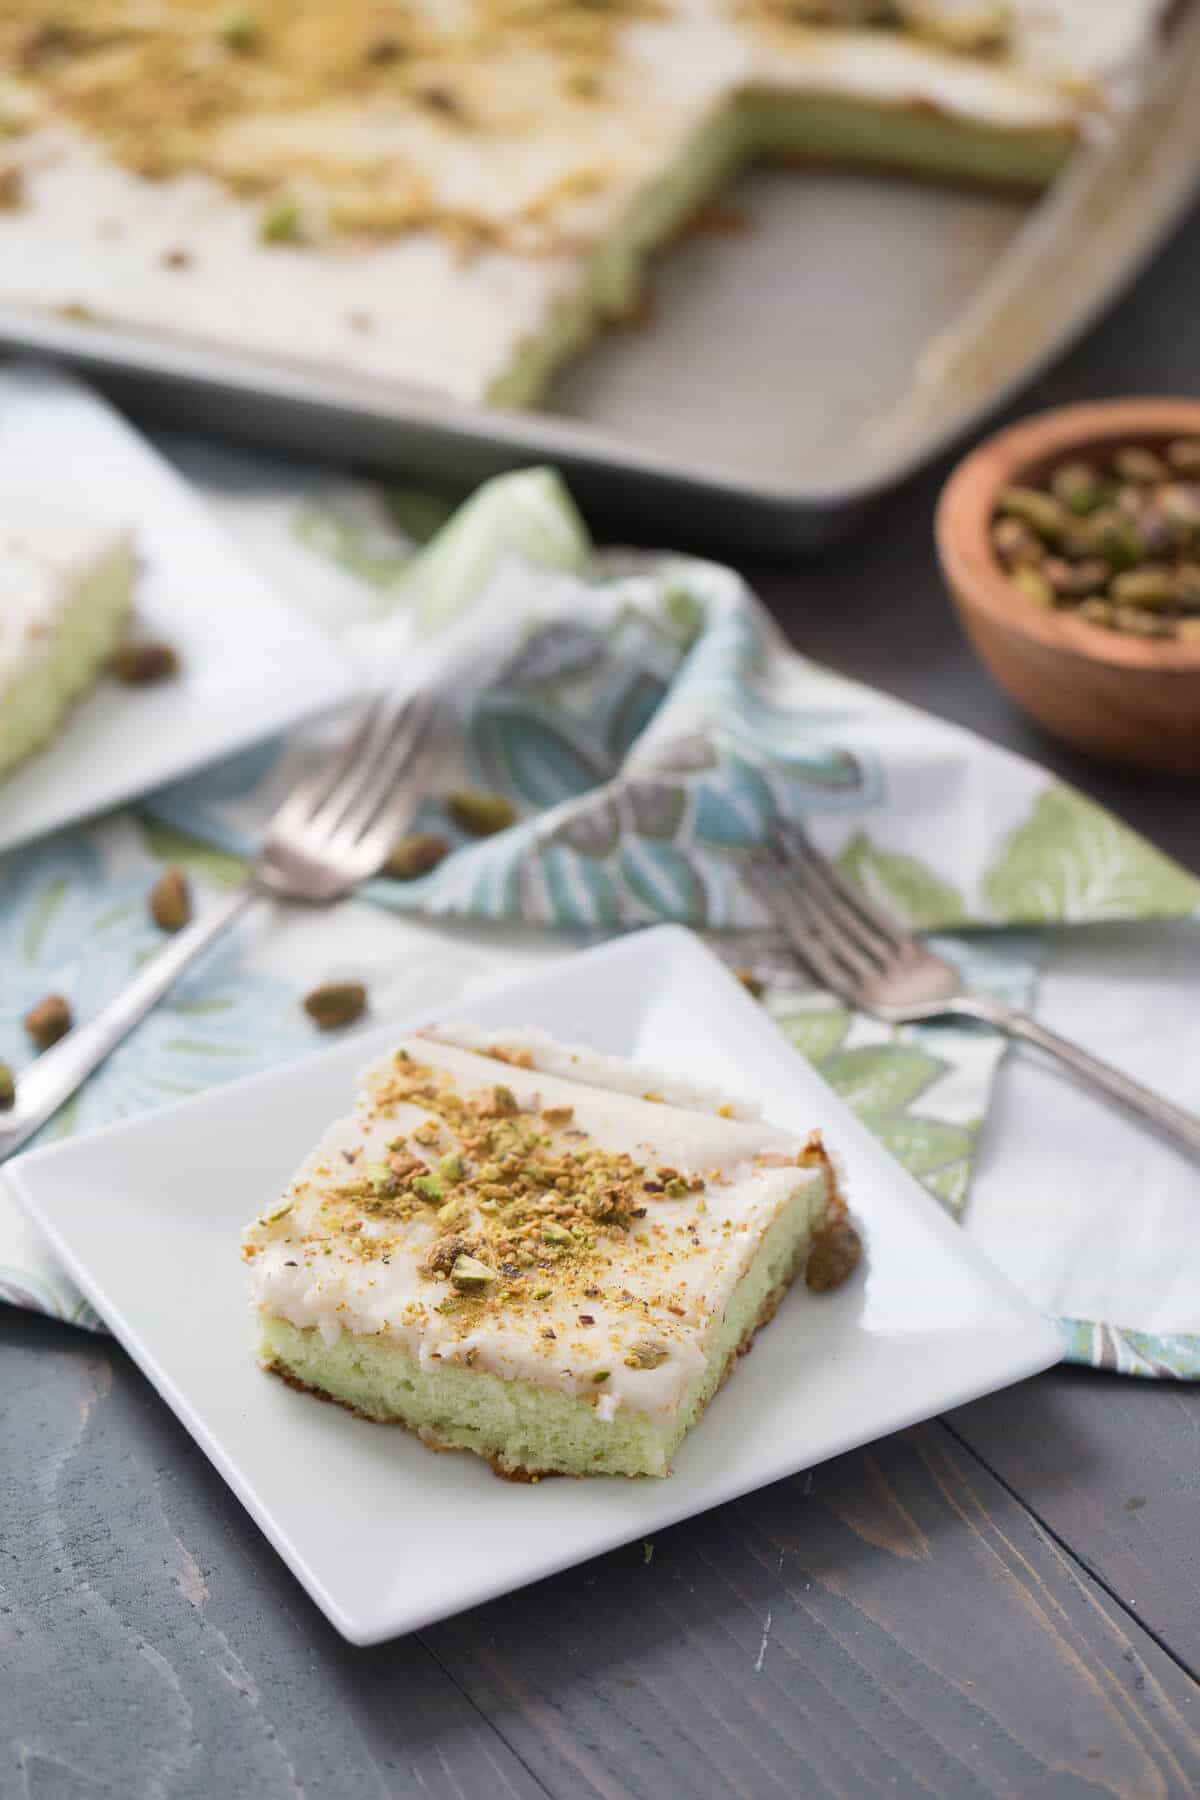 Pistachio pudding cake can be a great ending to any meal! This cake is soft, tender and sweet!